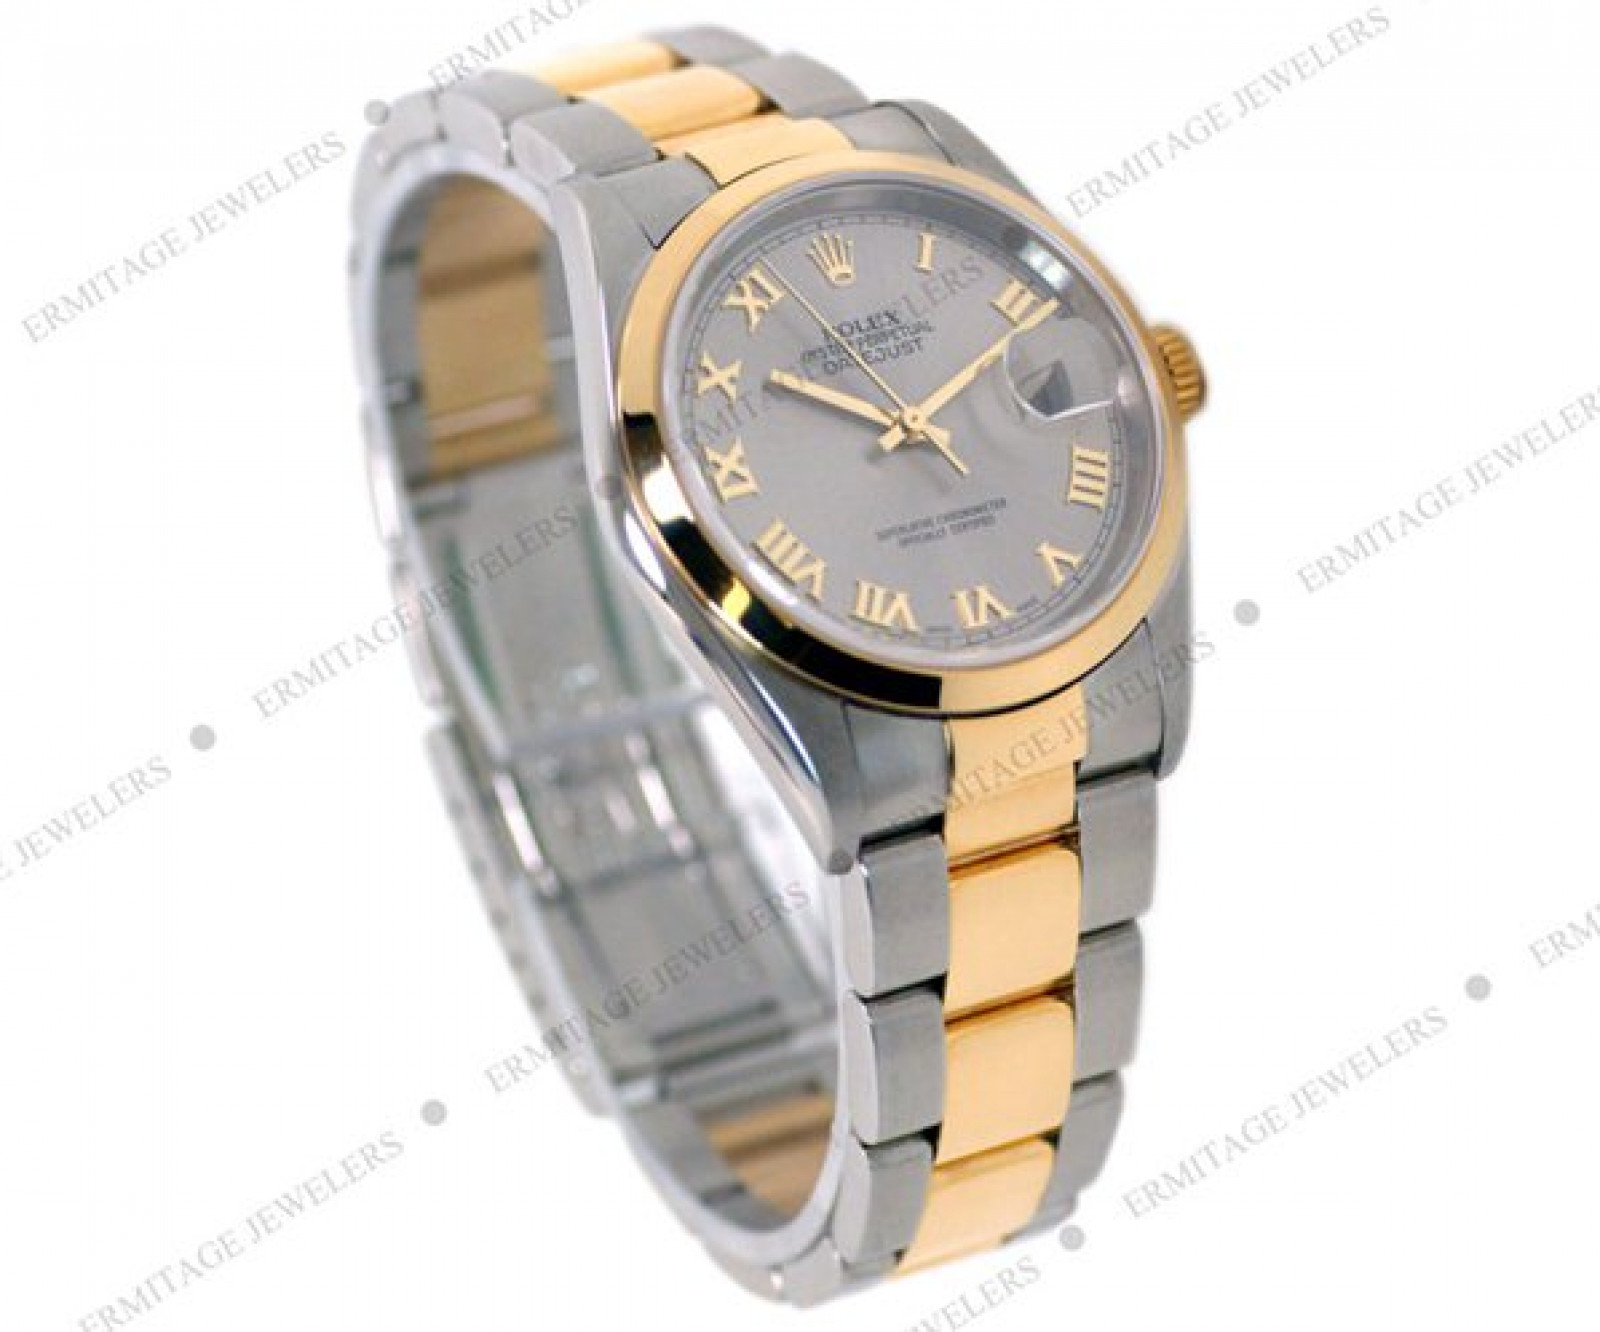 Used Rolex Datejust 16203 36 mm Gold & Steel